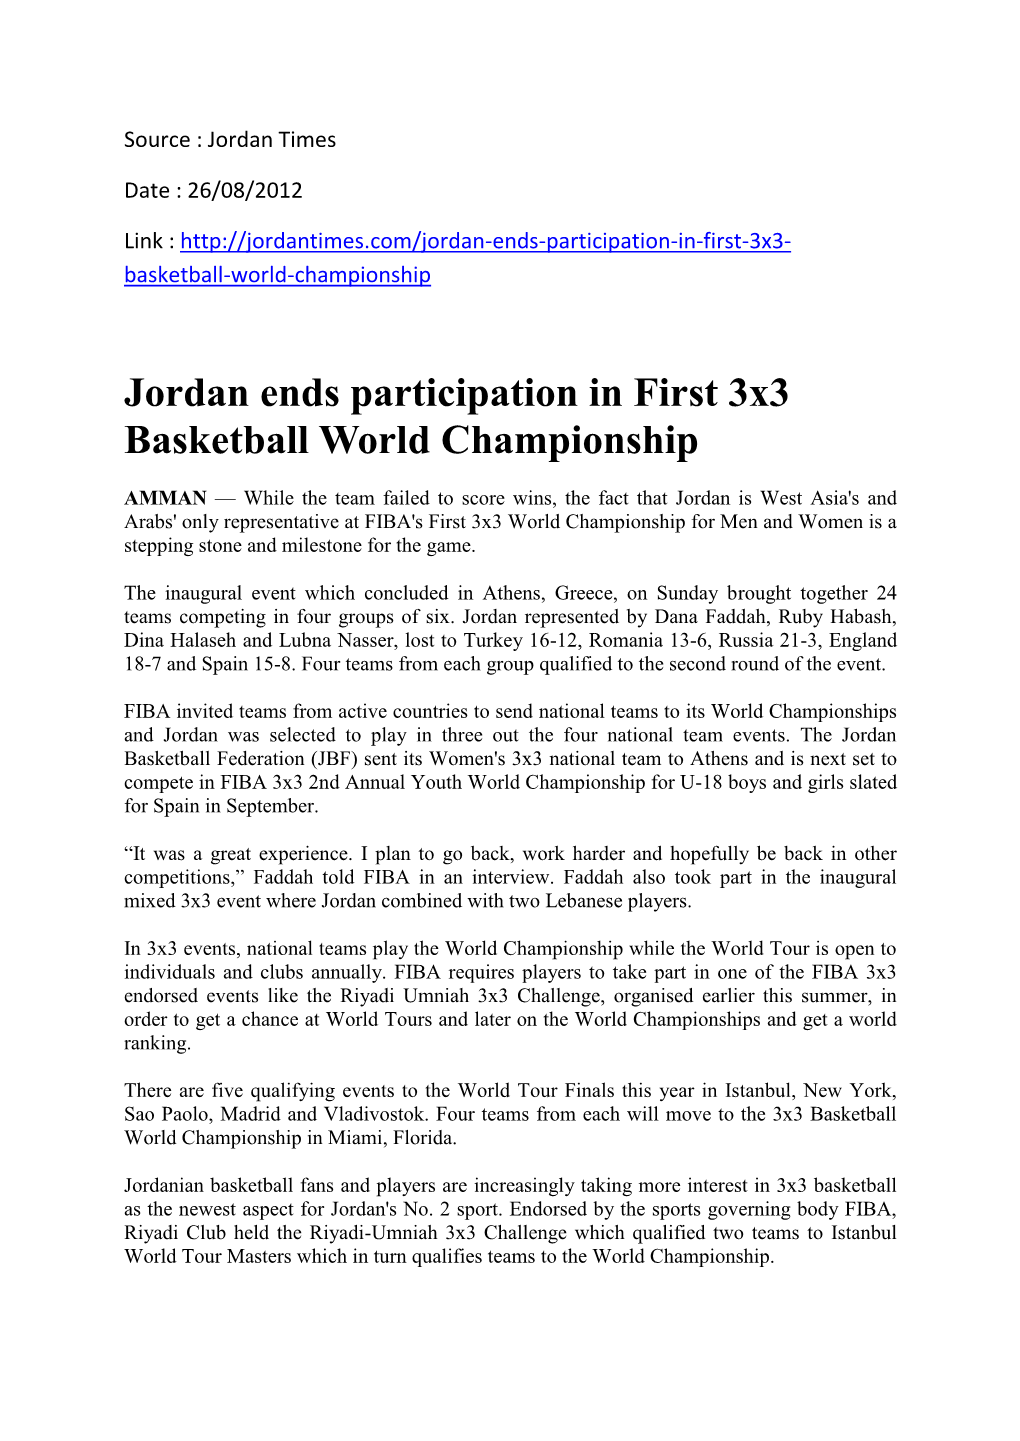 Jordan Ends Participation in First 3X3 Basketball World Championship